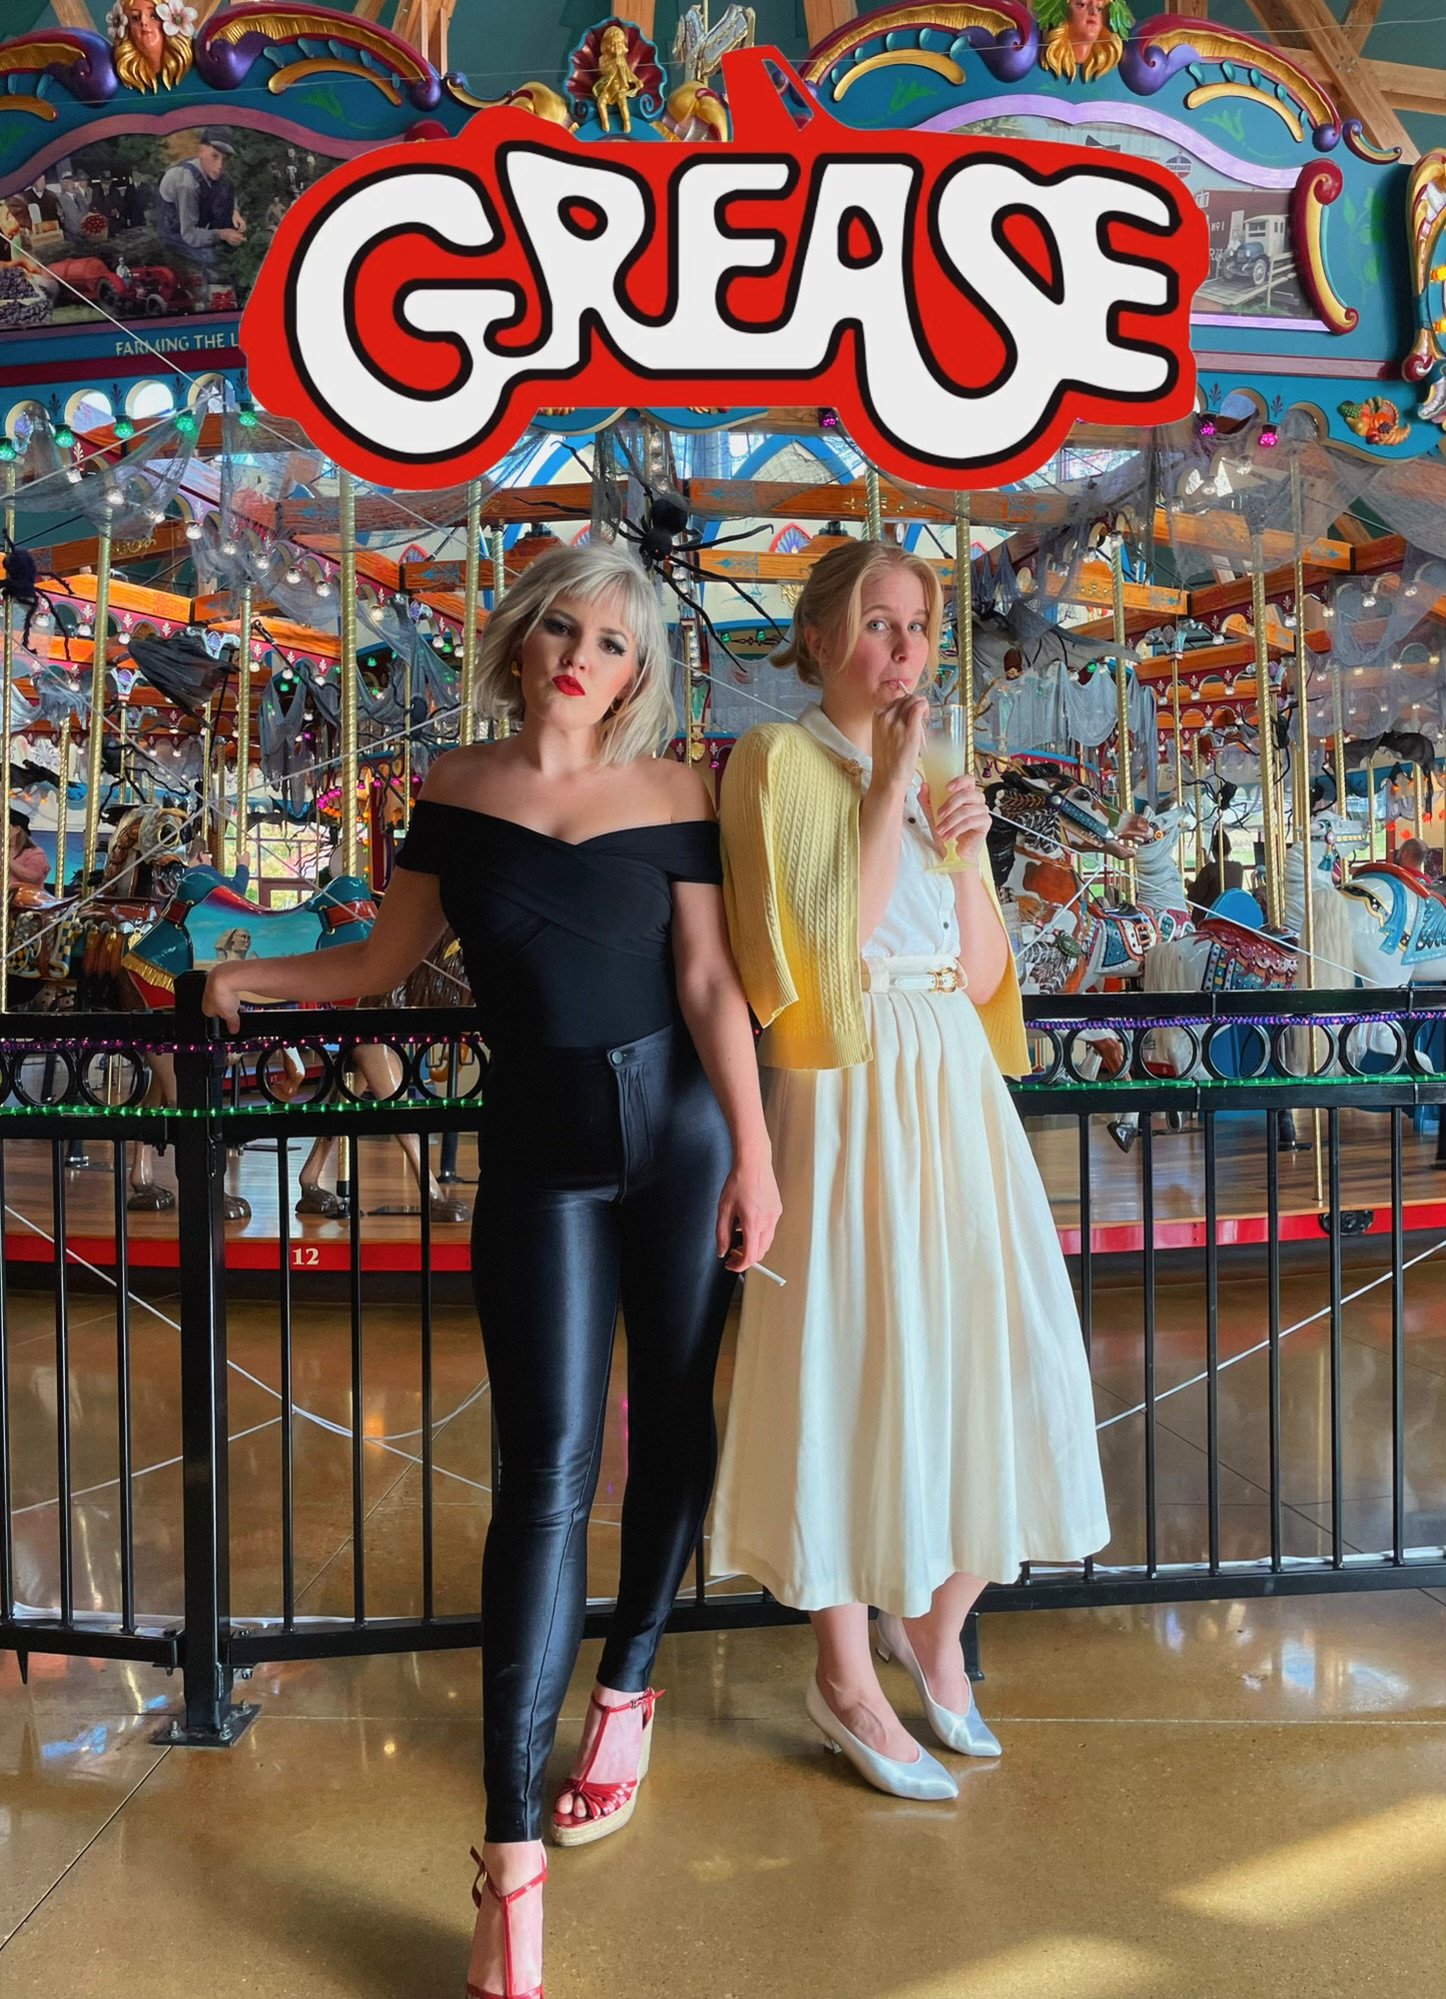 Good & Bad Sandy Grease Halloween Costume Idea for Two Blonde Women — Emily Retro - Vintage and DIY Home Design